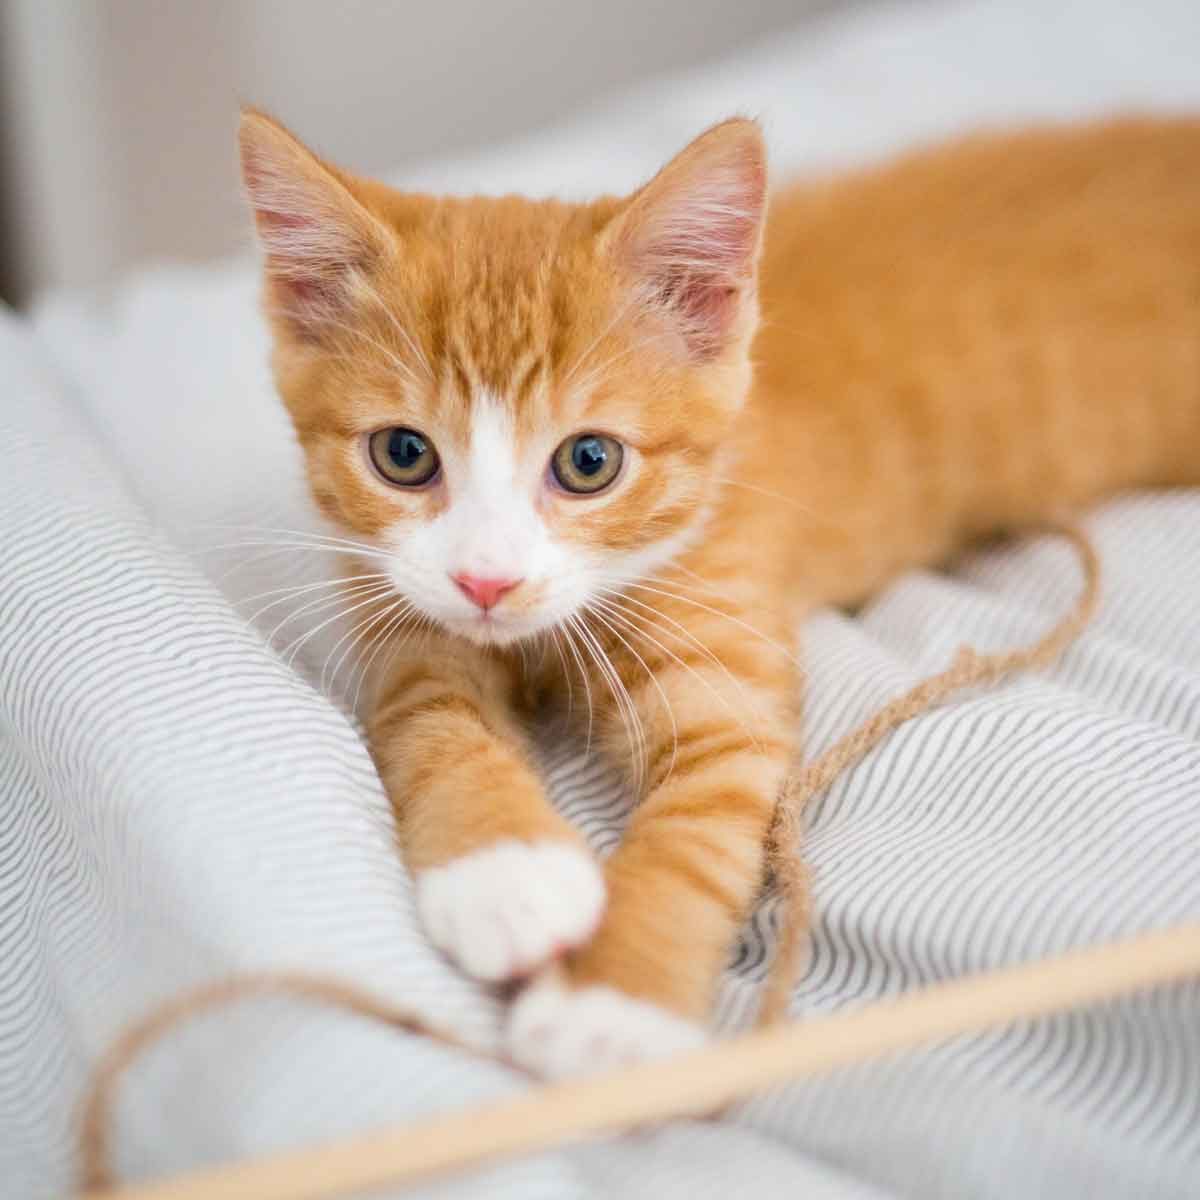 Diy Cat Toy Gettyimages 868495272